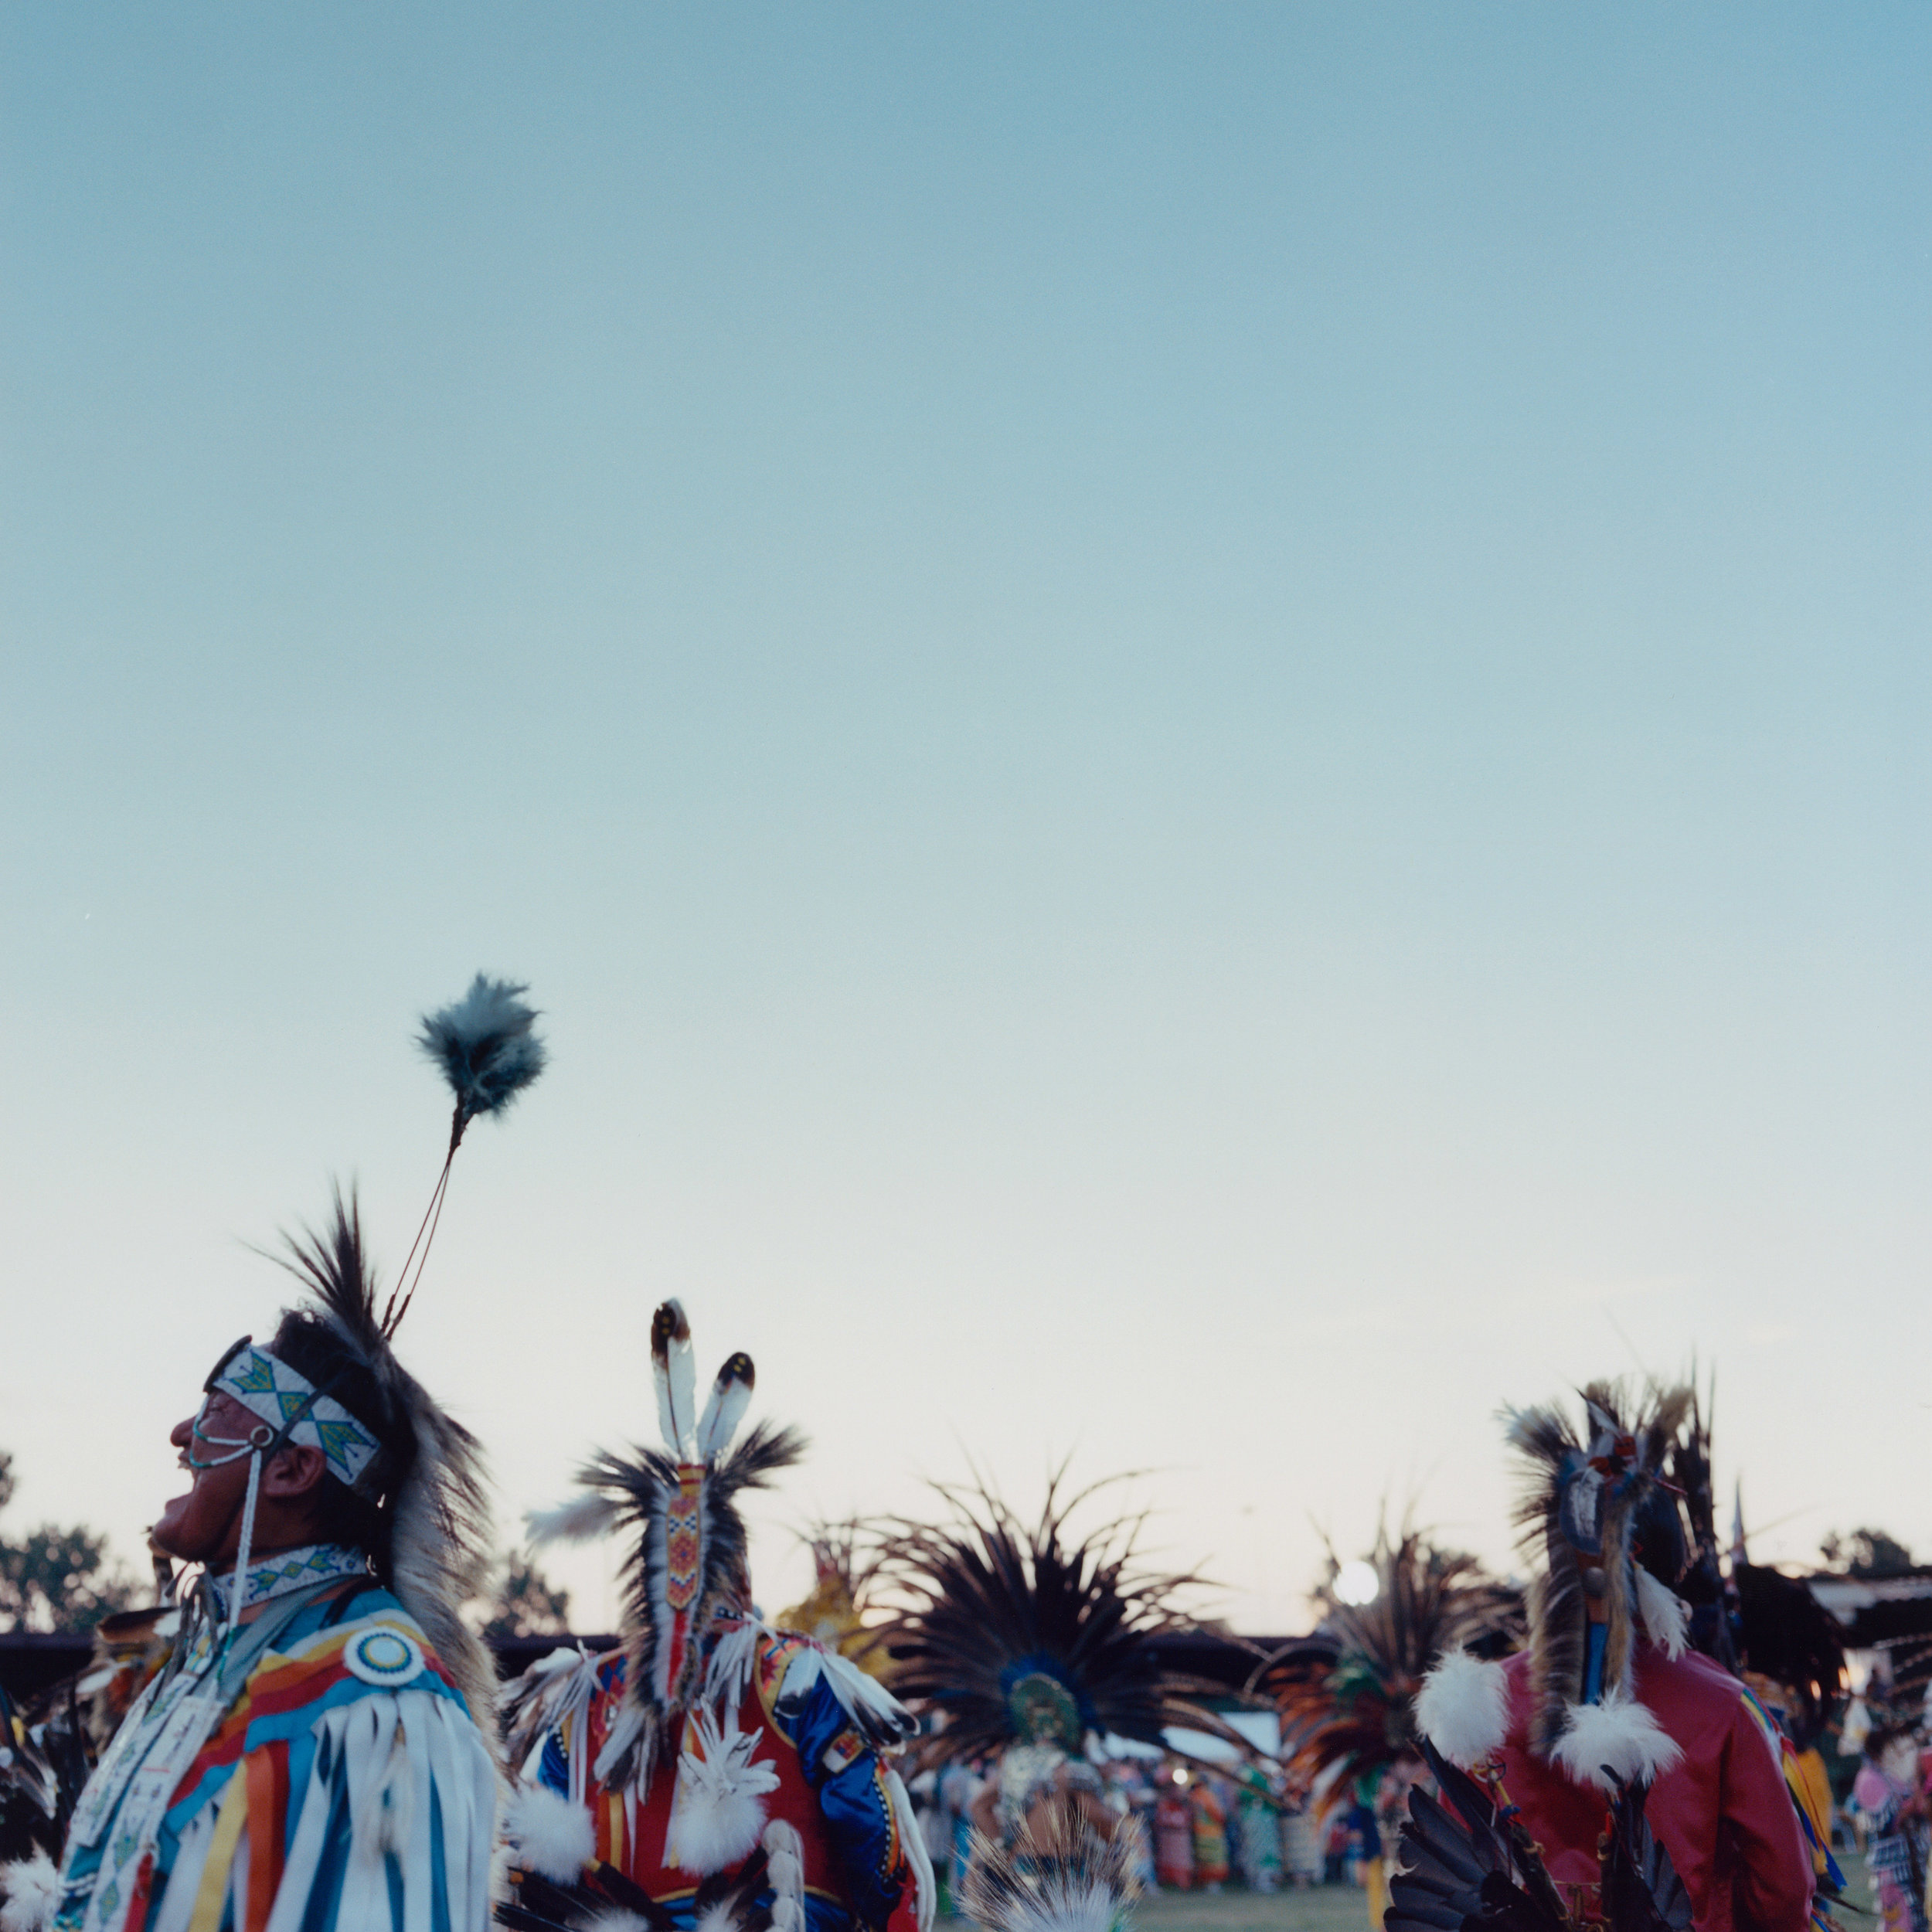 United Tribes Pow Wow